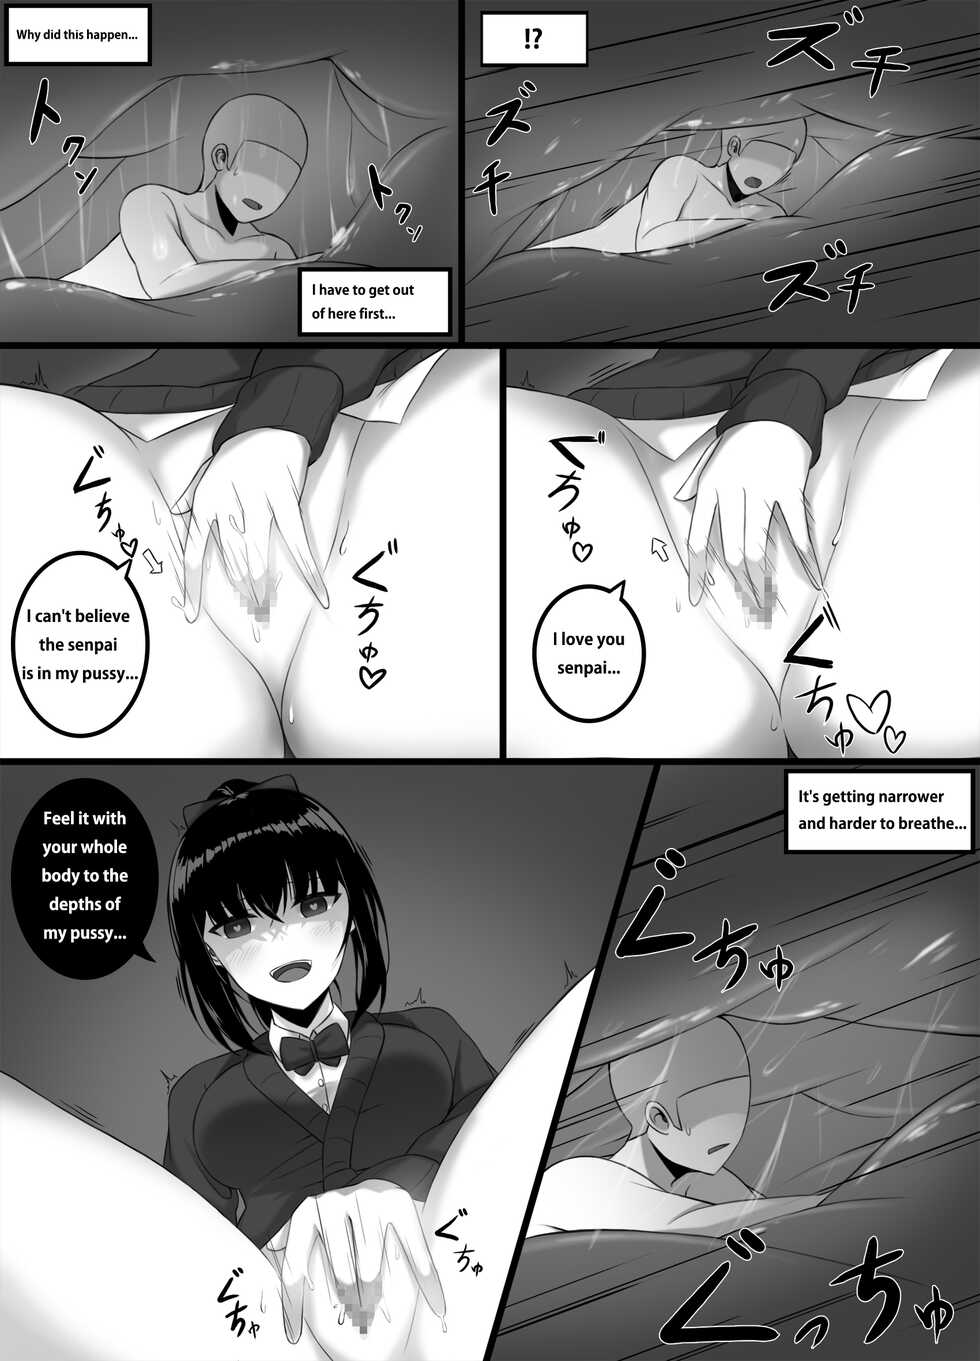 [Djqn] Yandere Girl - Page 8